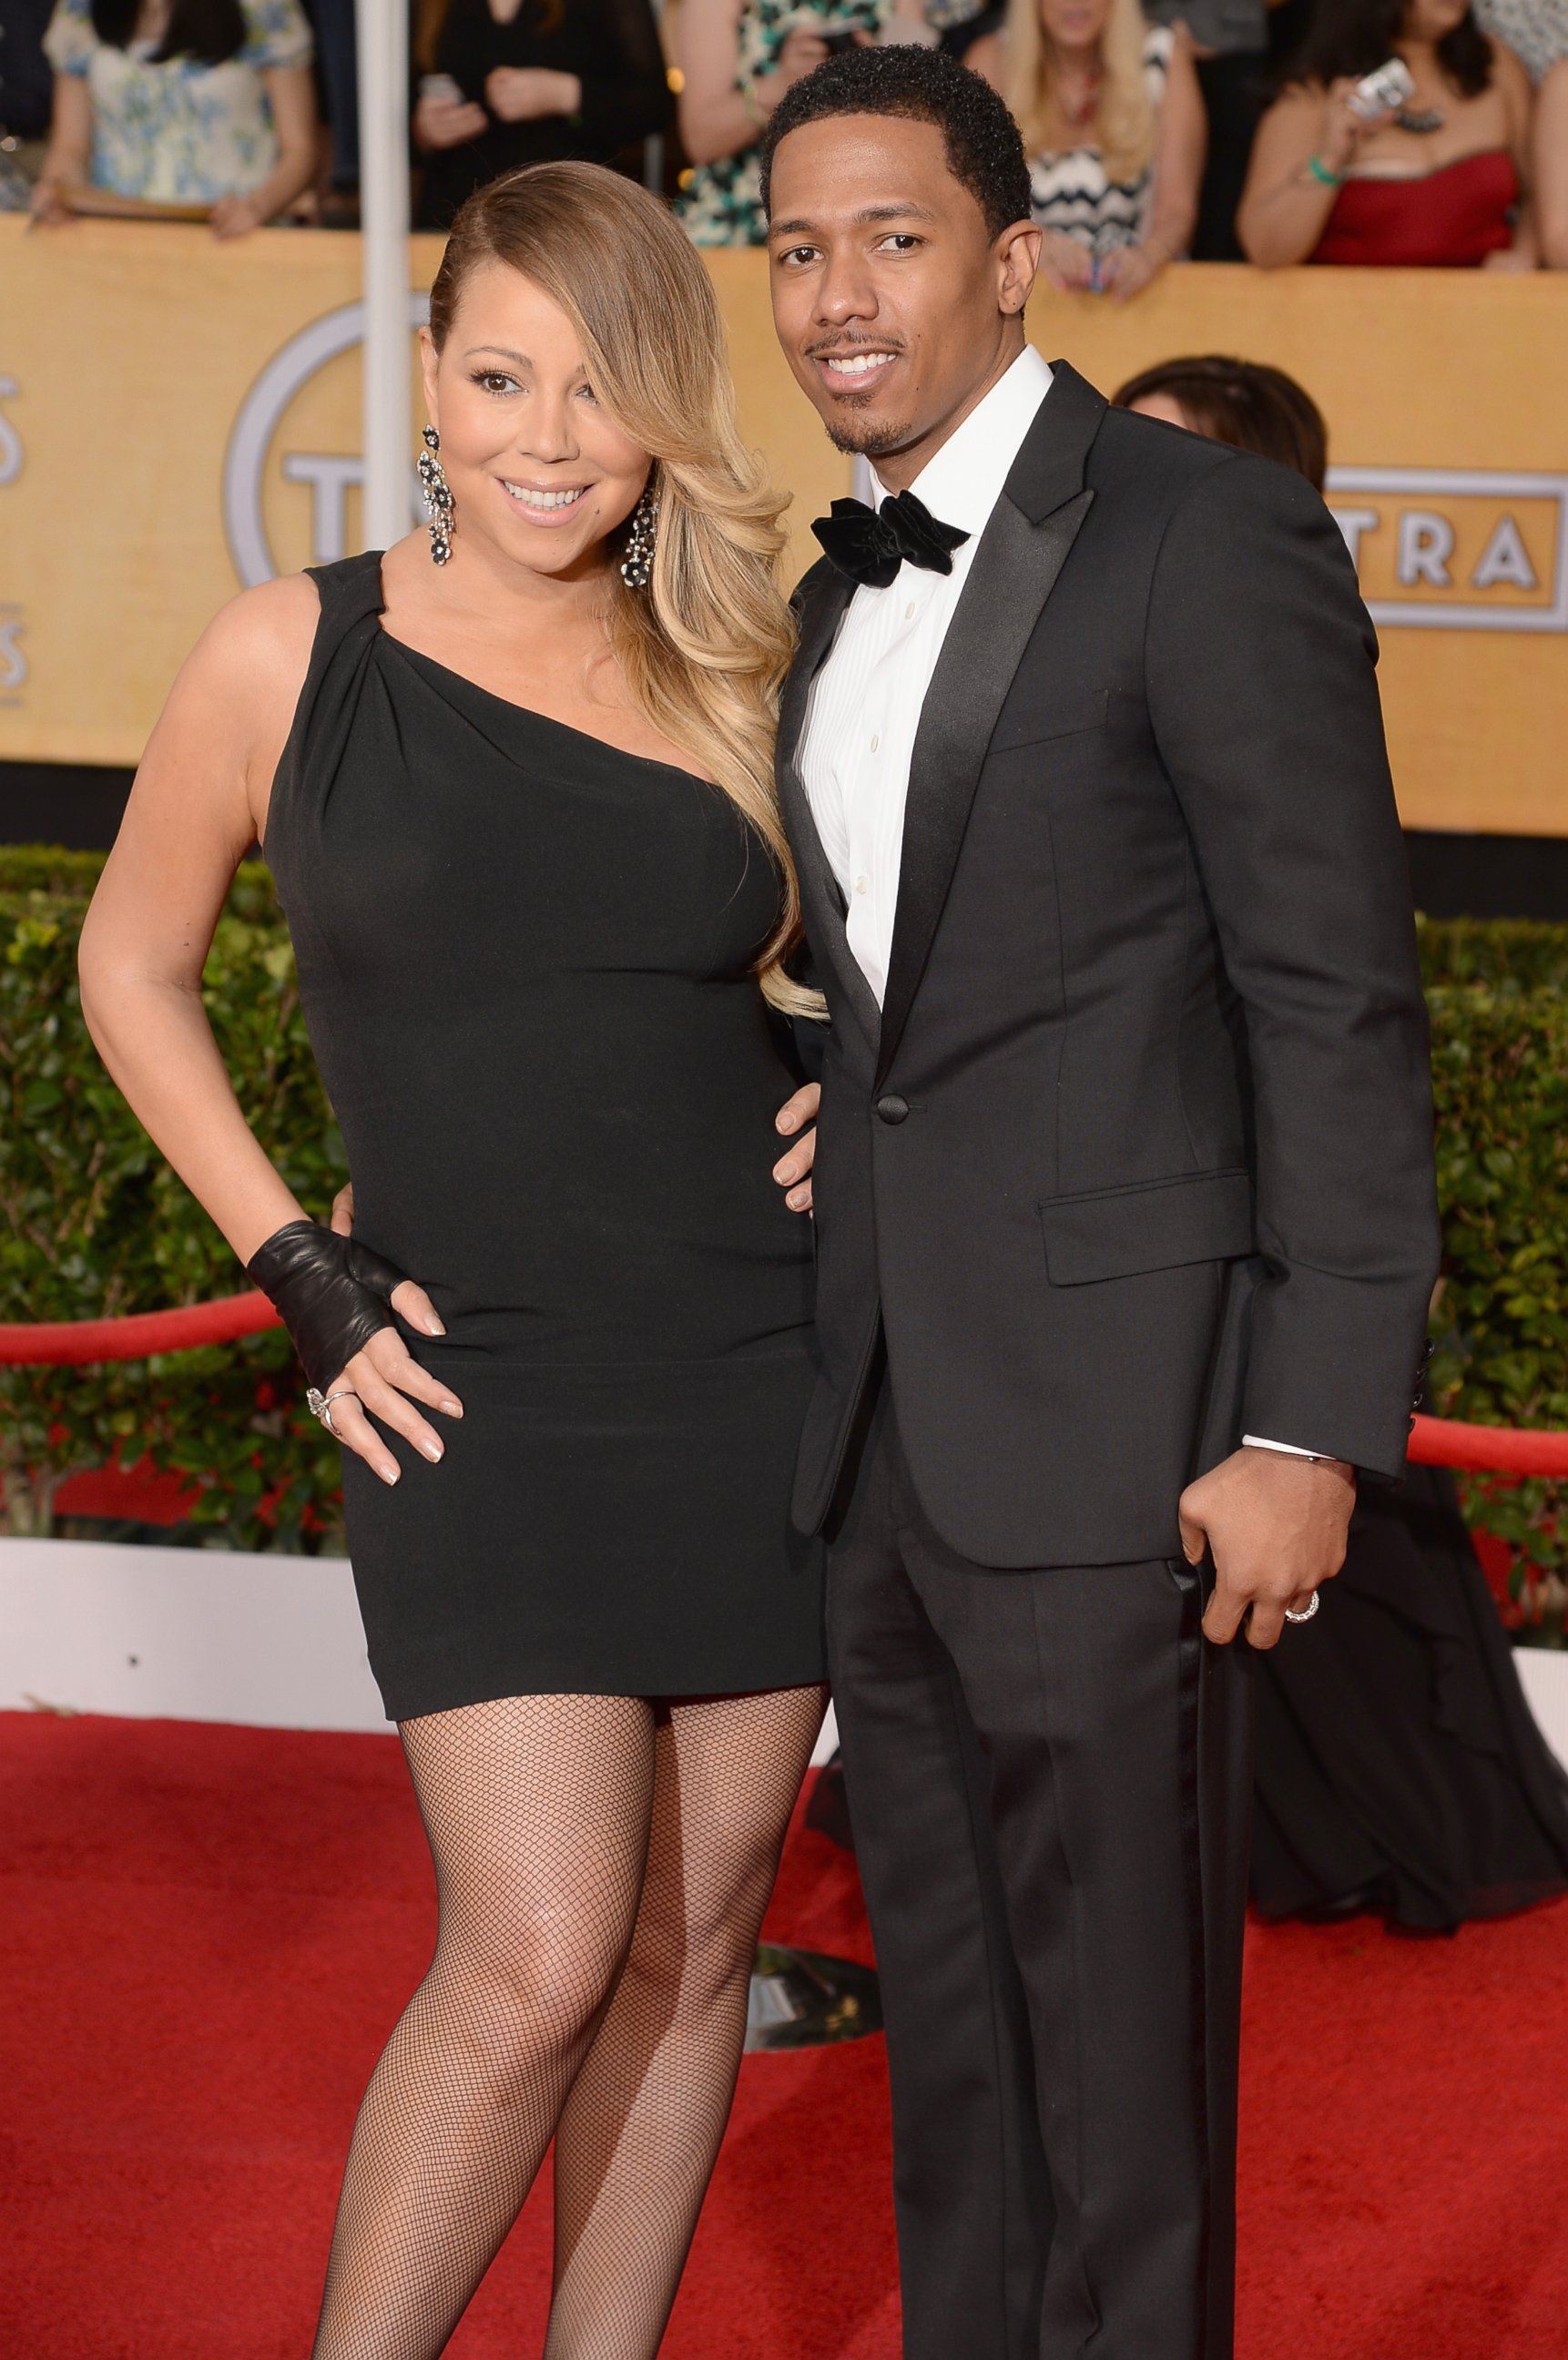 PHOTO: Mariah Carey and Nick Cannon attend the 20th Annual Screen Actors Guild Awards at The Shrine Auditorium on Jan. 18, 2014 in Los Angeles, Calif.